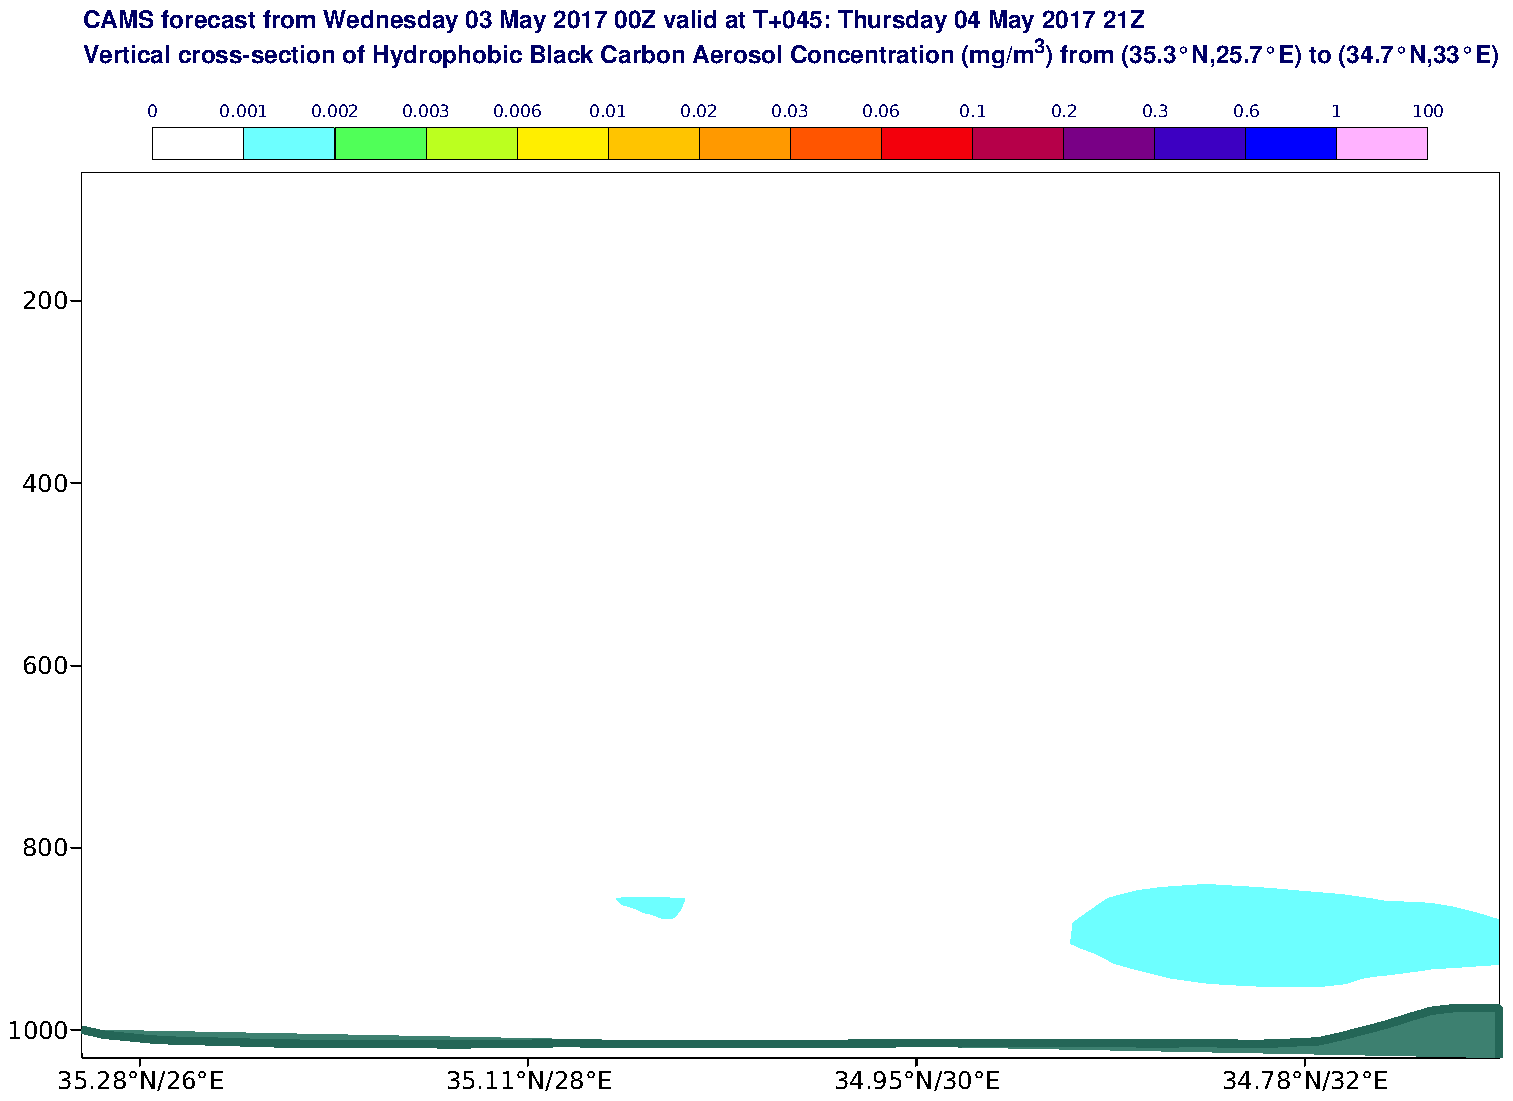 Vertical cross-section of Hydrophobic Black Carbon Aerosol Concentration (mg/m3) valid at T45 - 2017-05-04 21:00